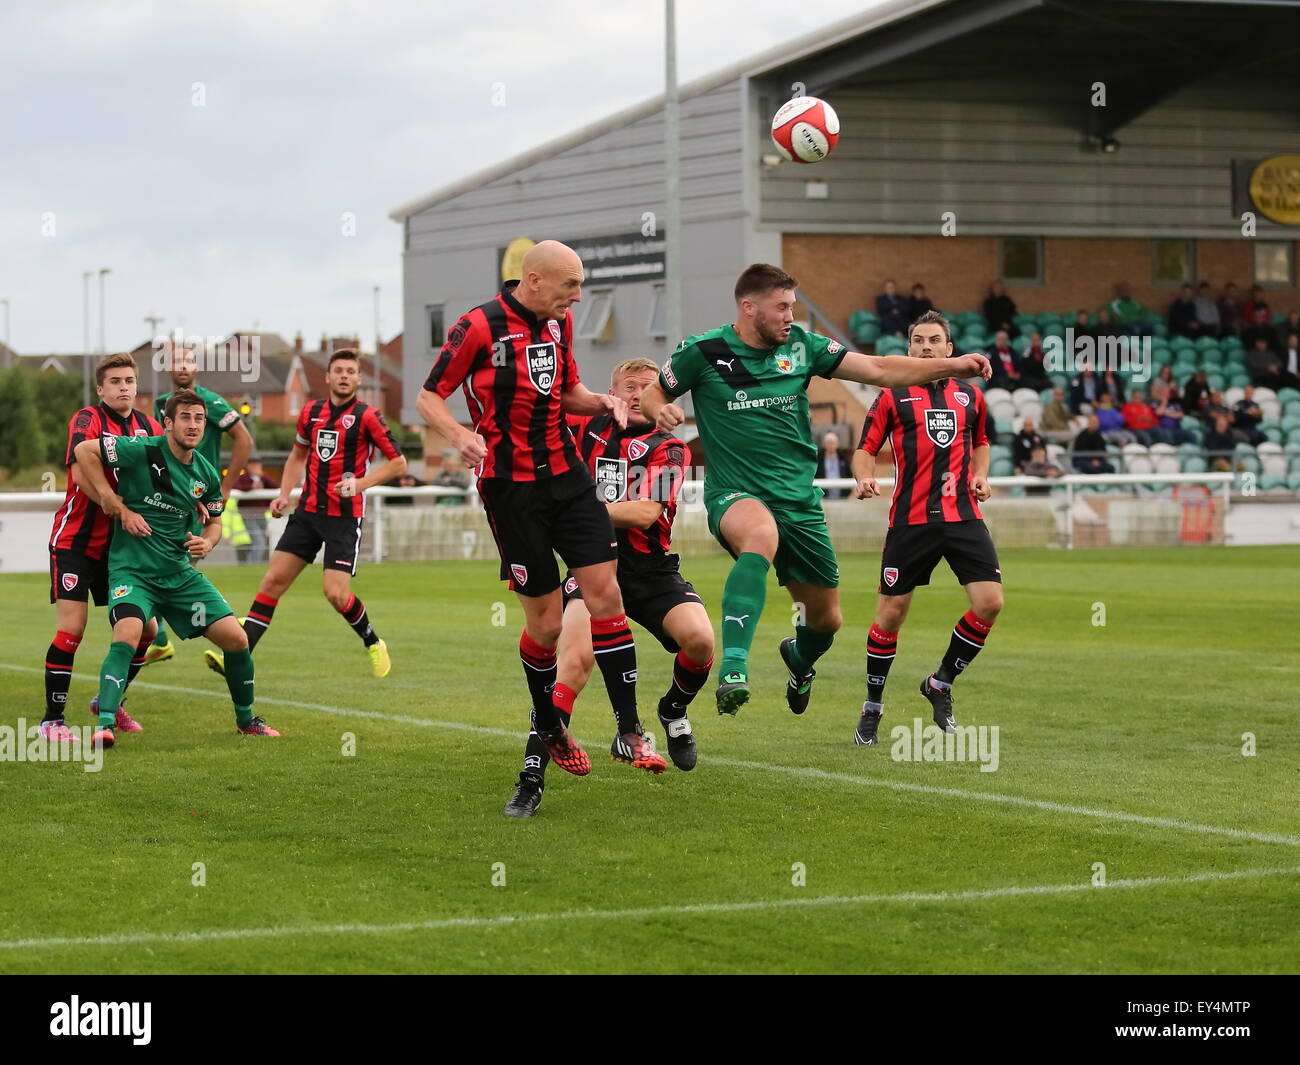 Nantwich, Cheshire, UK. 21st July, 2015. Nantwich Town entertain League Two Morecambe in a pre season friendly at The Weaver Stadium. Morecambe ran out 6-0 victors.Nantwich Town's Ben Mills heads the ball in the Morecambe area. Credit:  SJN/Alamy Live News Stock Photo